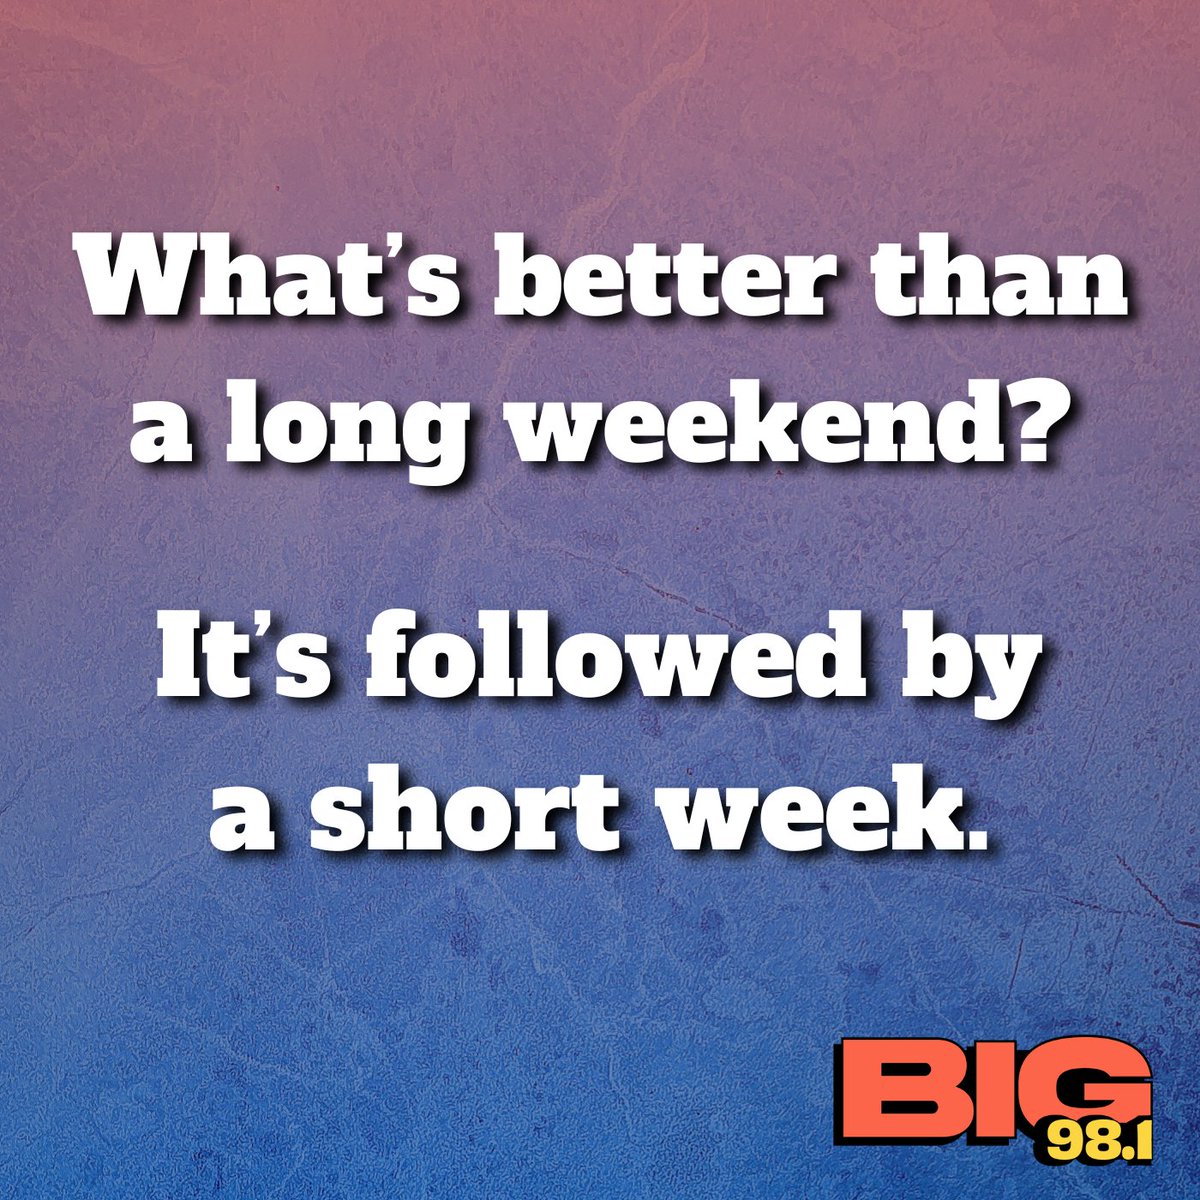 This Tuesday might feel like a Monday, but at least we're one day closer to Friday. 😎 #BIG981